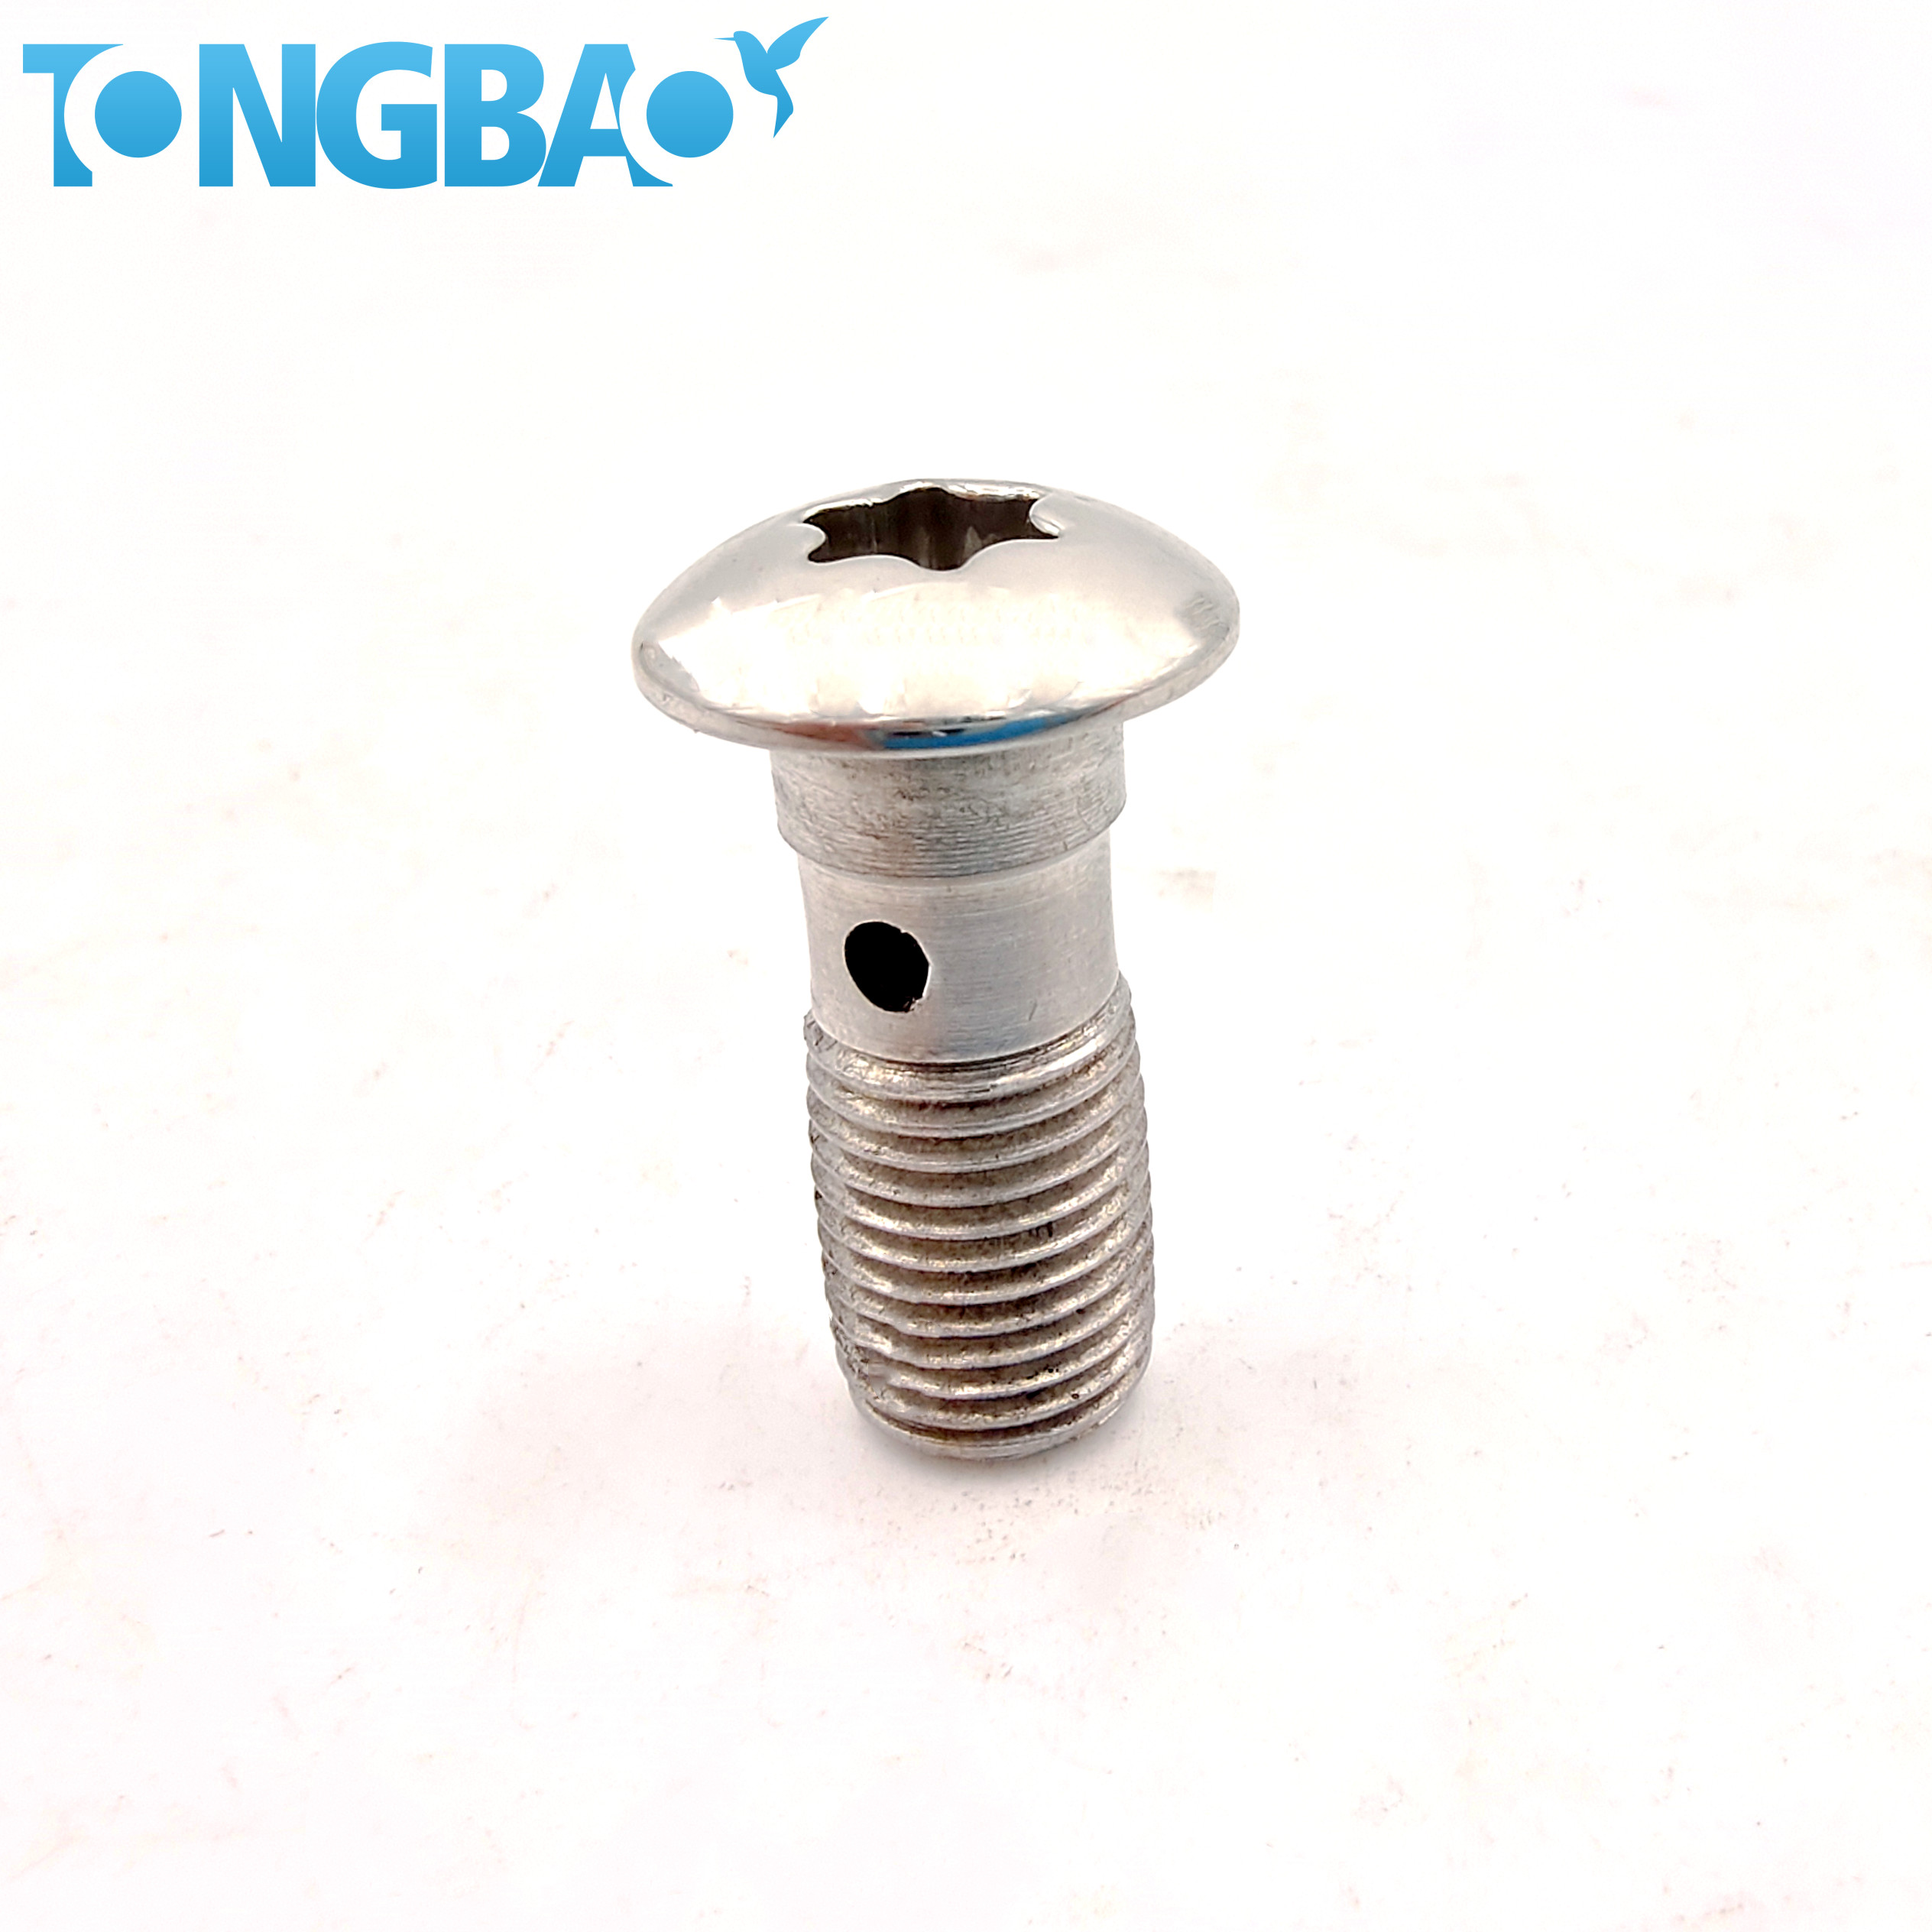 Stainless Steel303 Polishing parts 